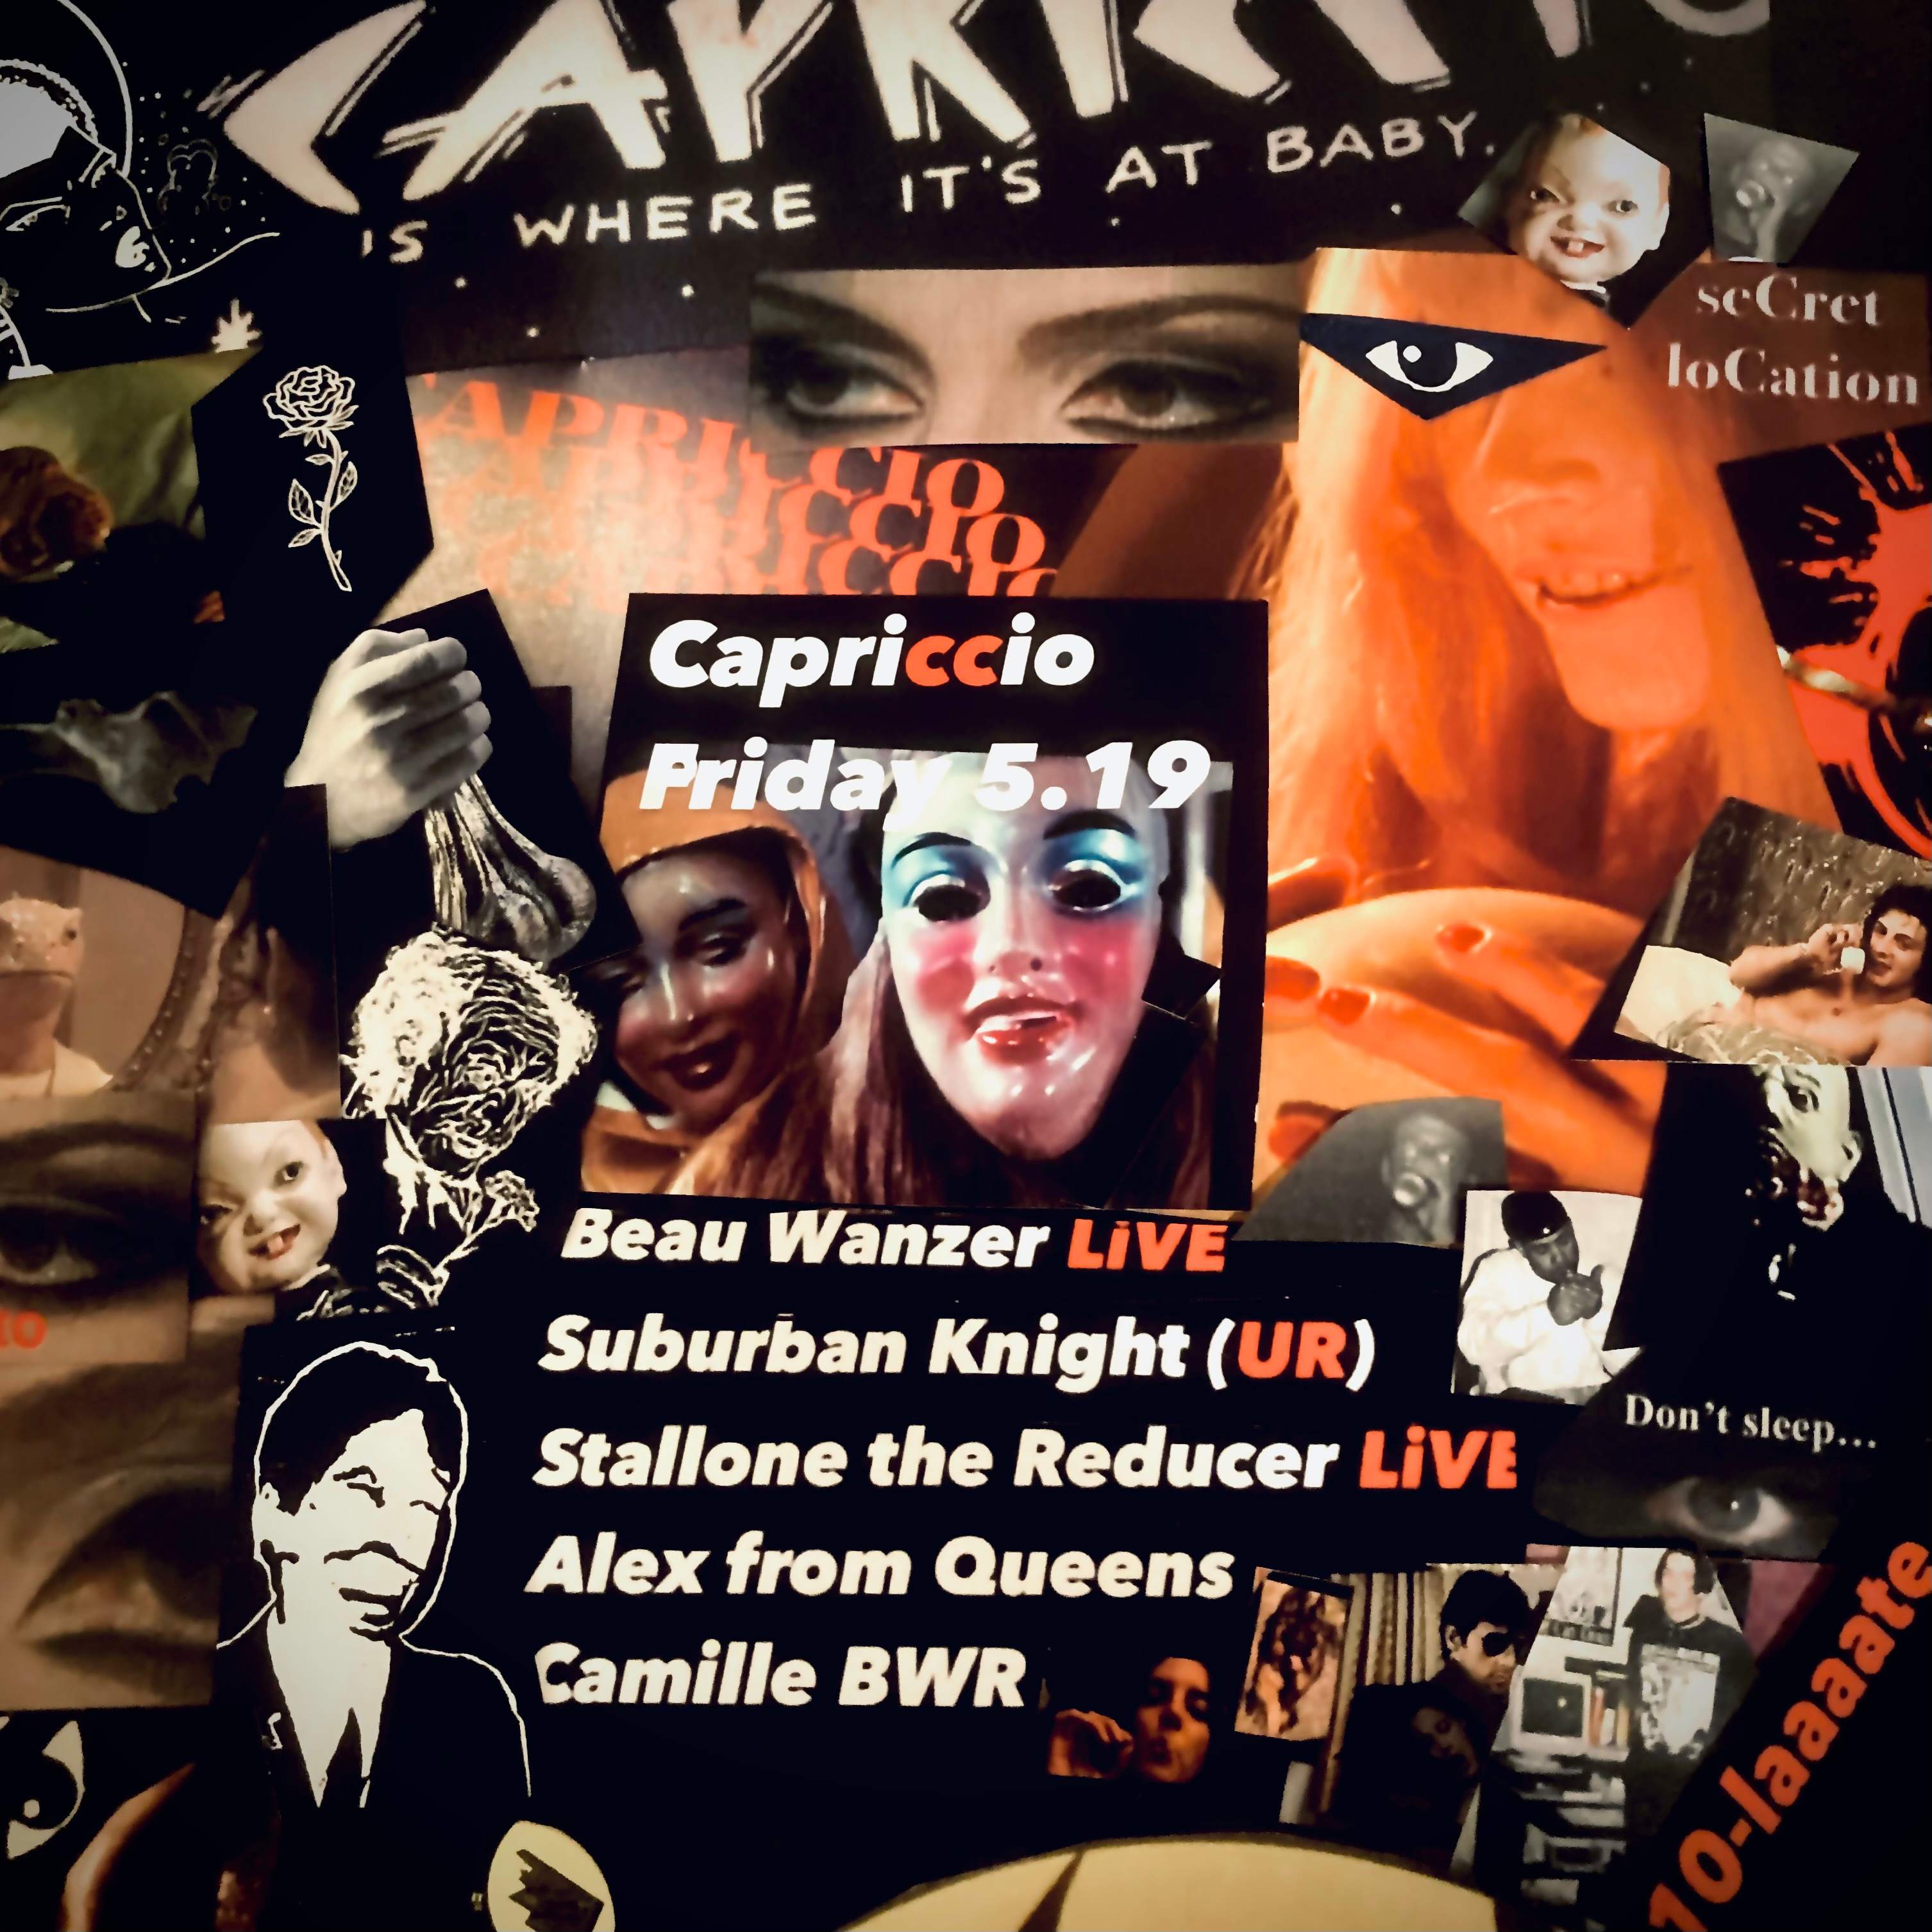 Capriccio with Beau Wanzer LIVE, Suburban Knight, Stallone The Reducer LIVE, AFQ, Camille - フライヤー表